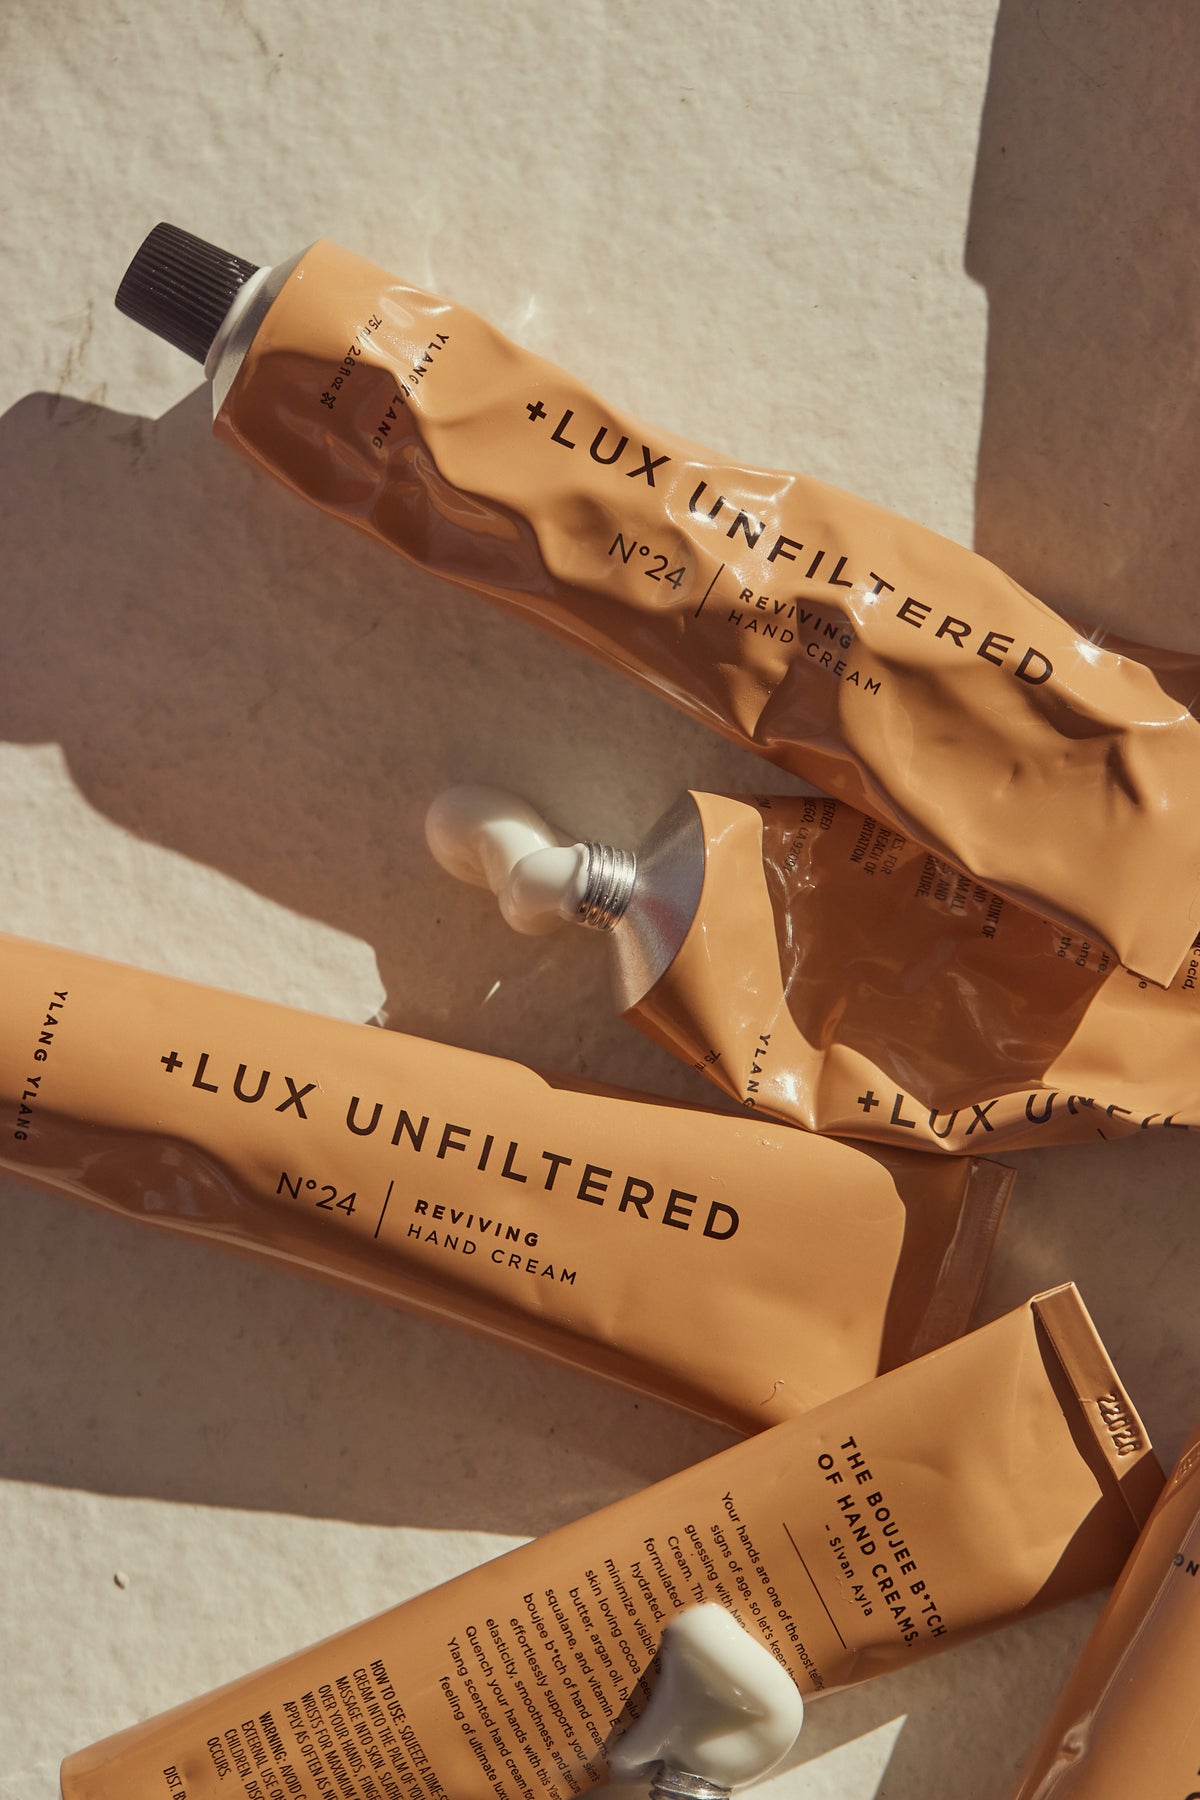 + Lux Unfiltered N 24 Reviving Hand Cream (Ylang Ylang) - Best Hand Lotion - Hand Cream for Dry Cracked Hands with Shea Butter Argan Oil Hyaluronic